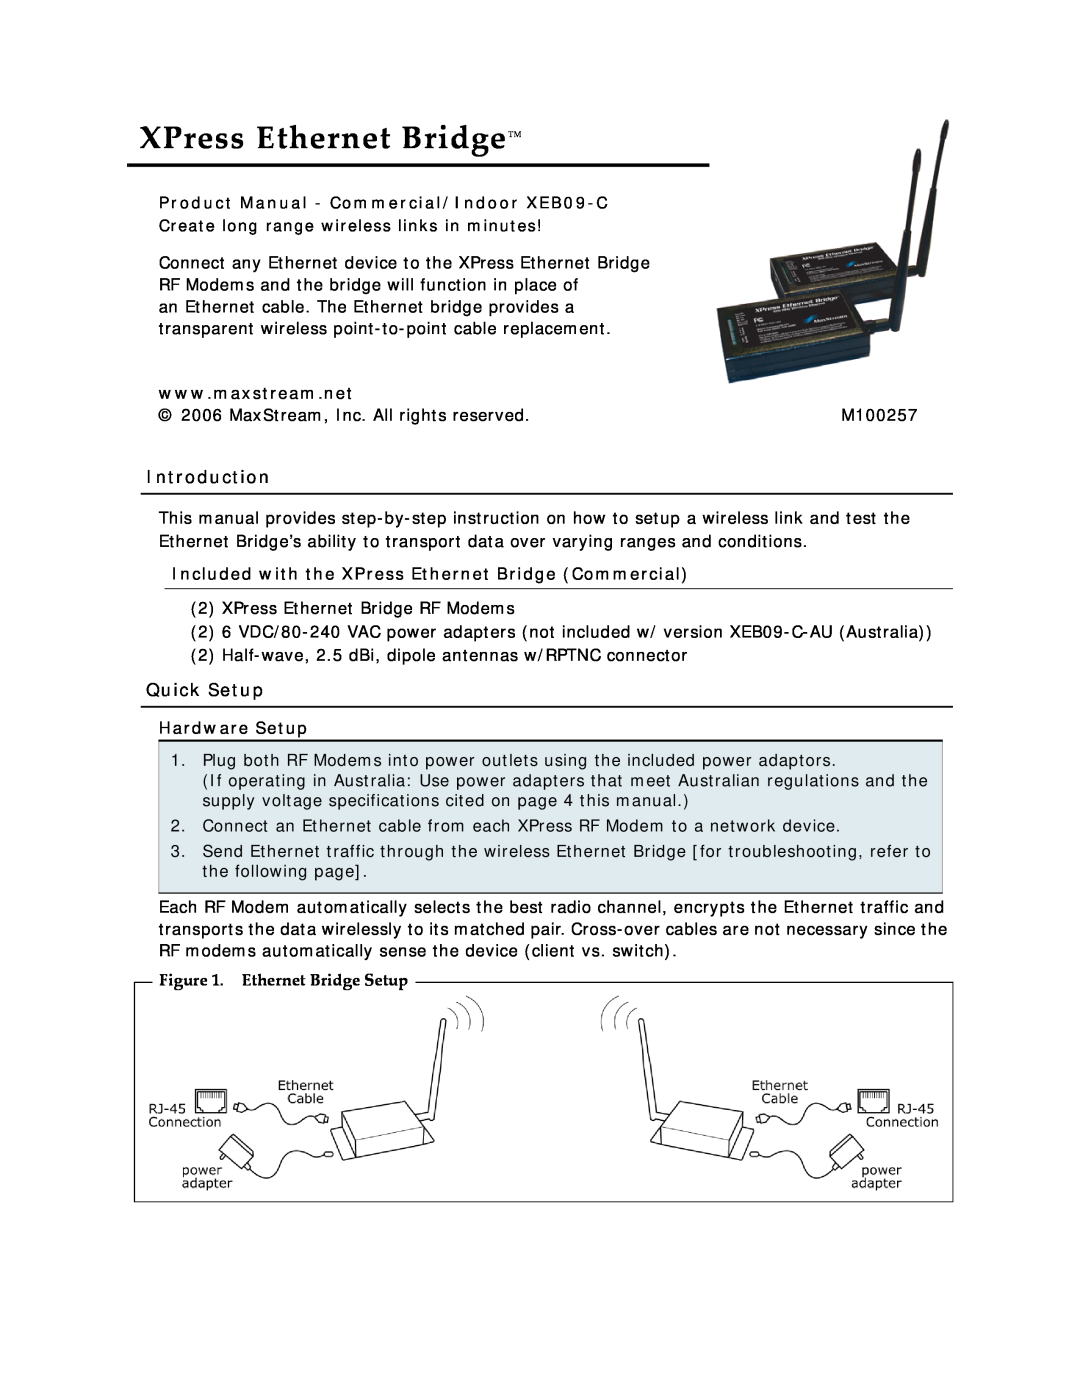 Xpress specifications Introduction, Quick Setup, Product Manual - Commercial/Indoor XEB09-C, Hardware Setup 